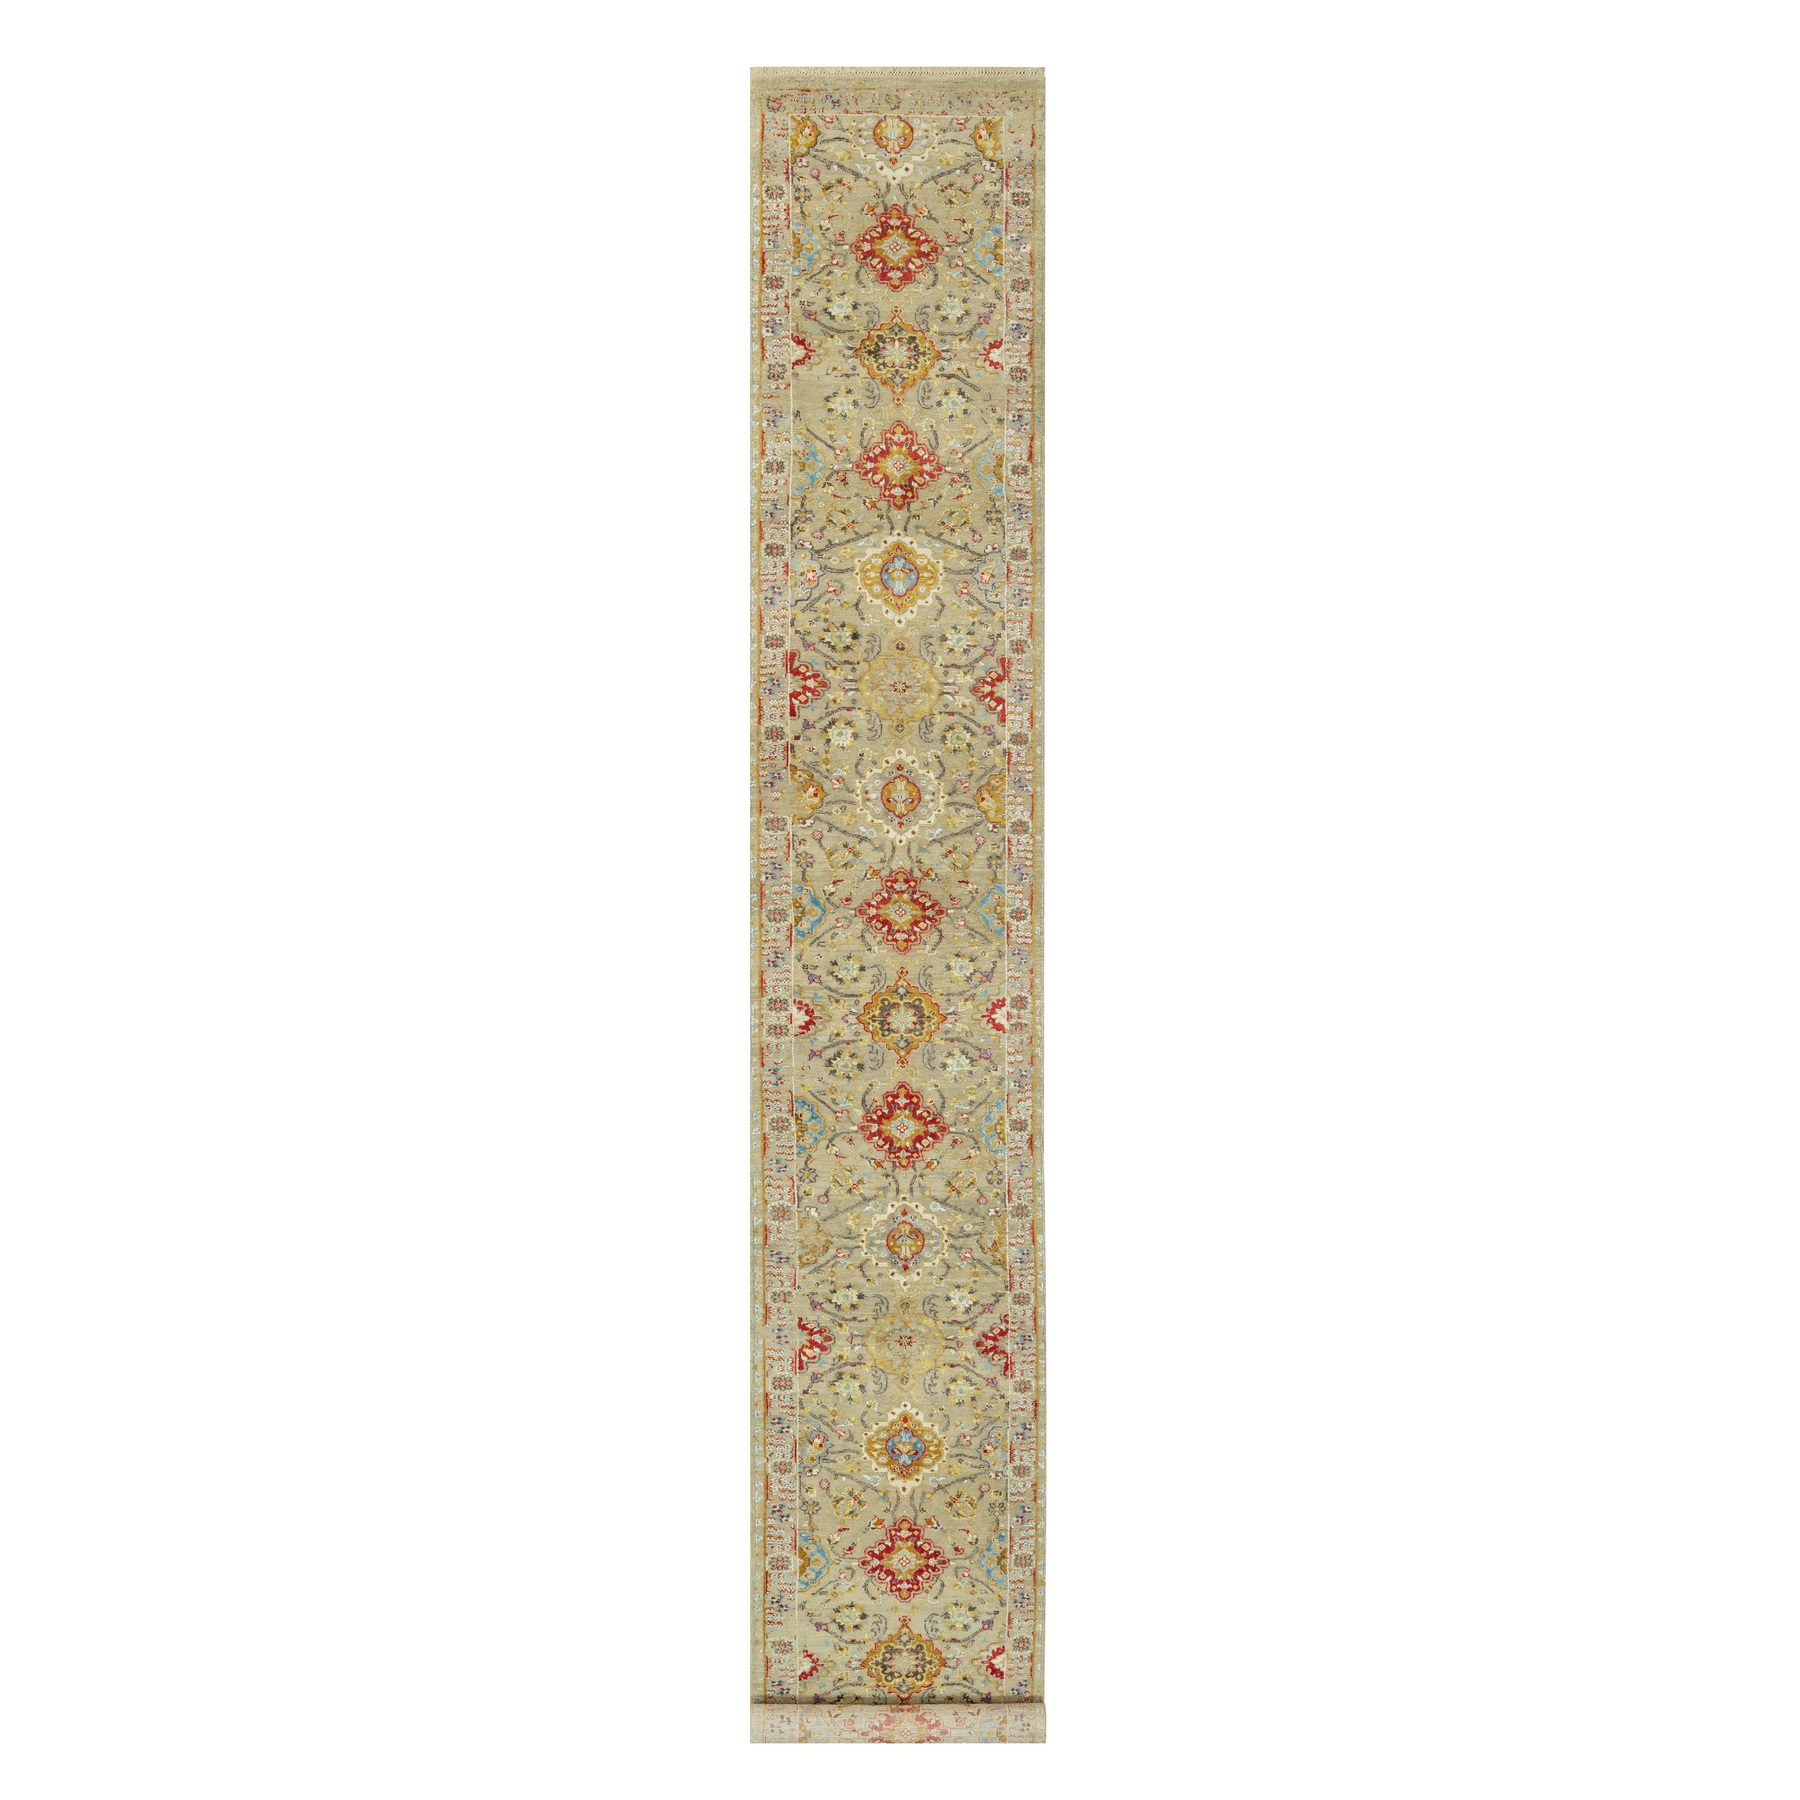  Silk Hand-Knotted Area Rug 2'9